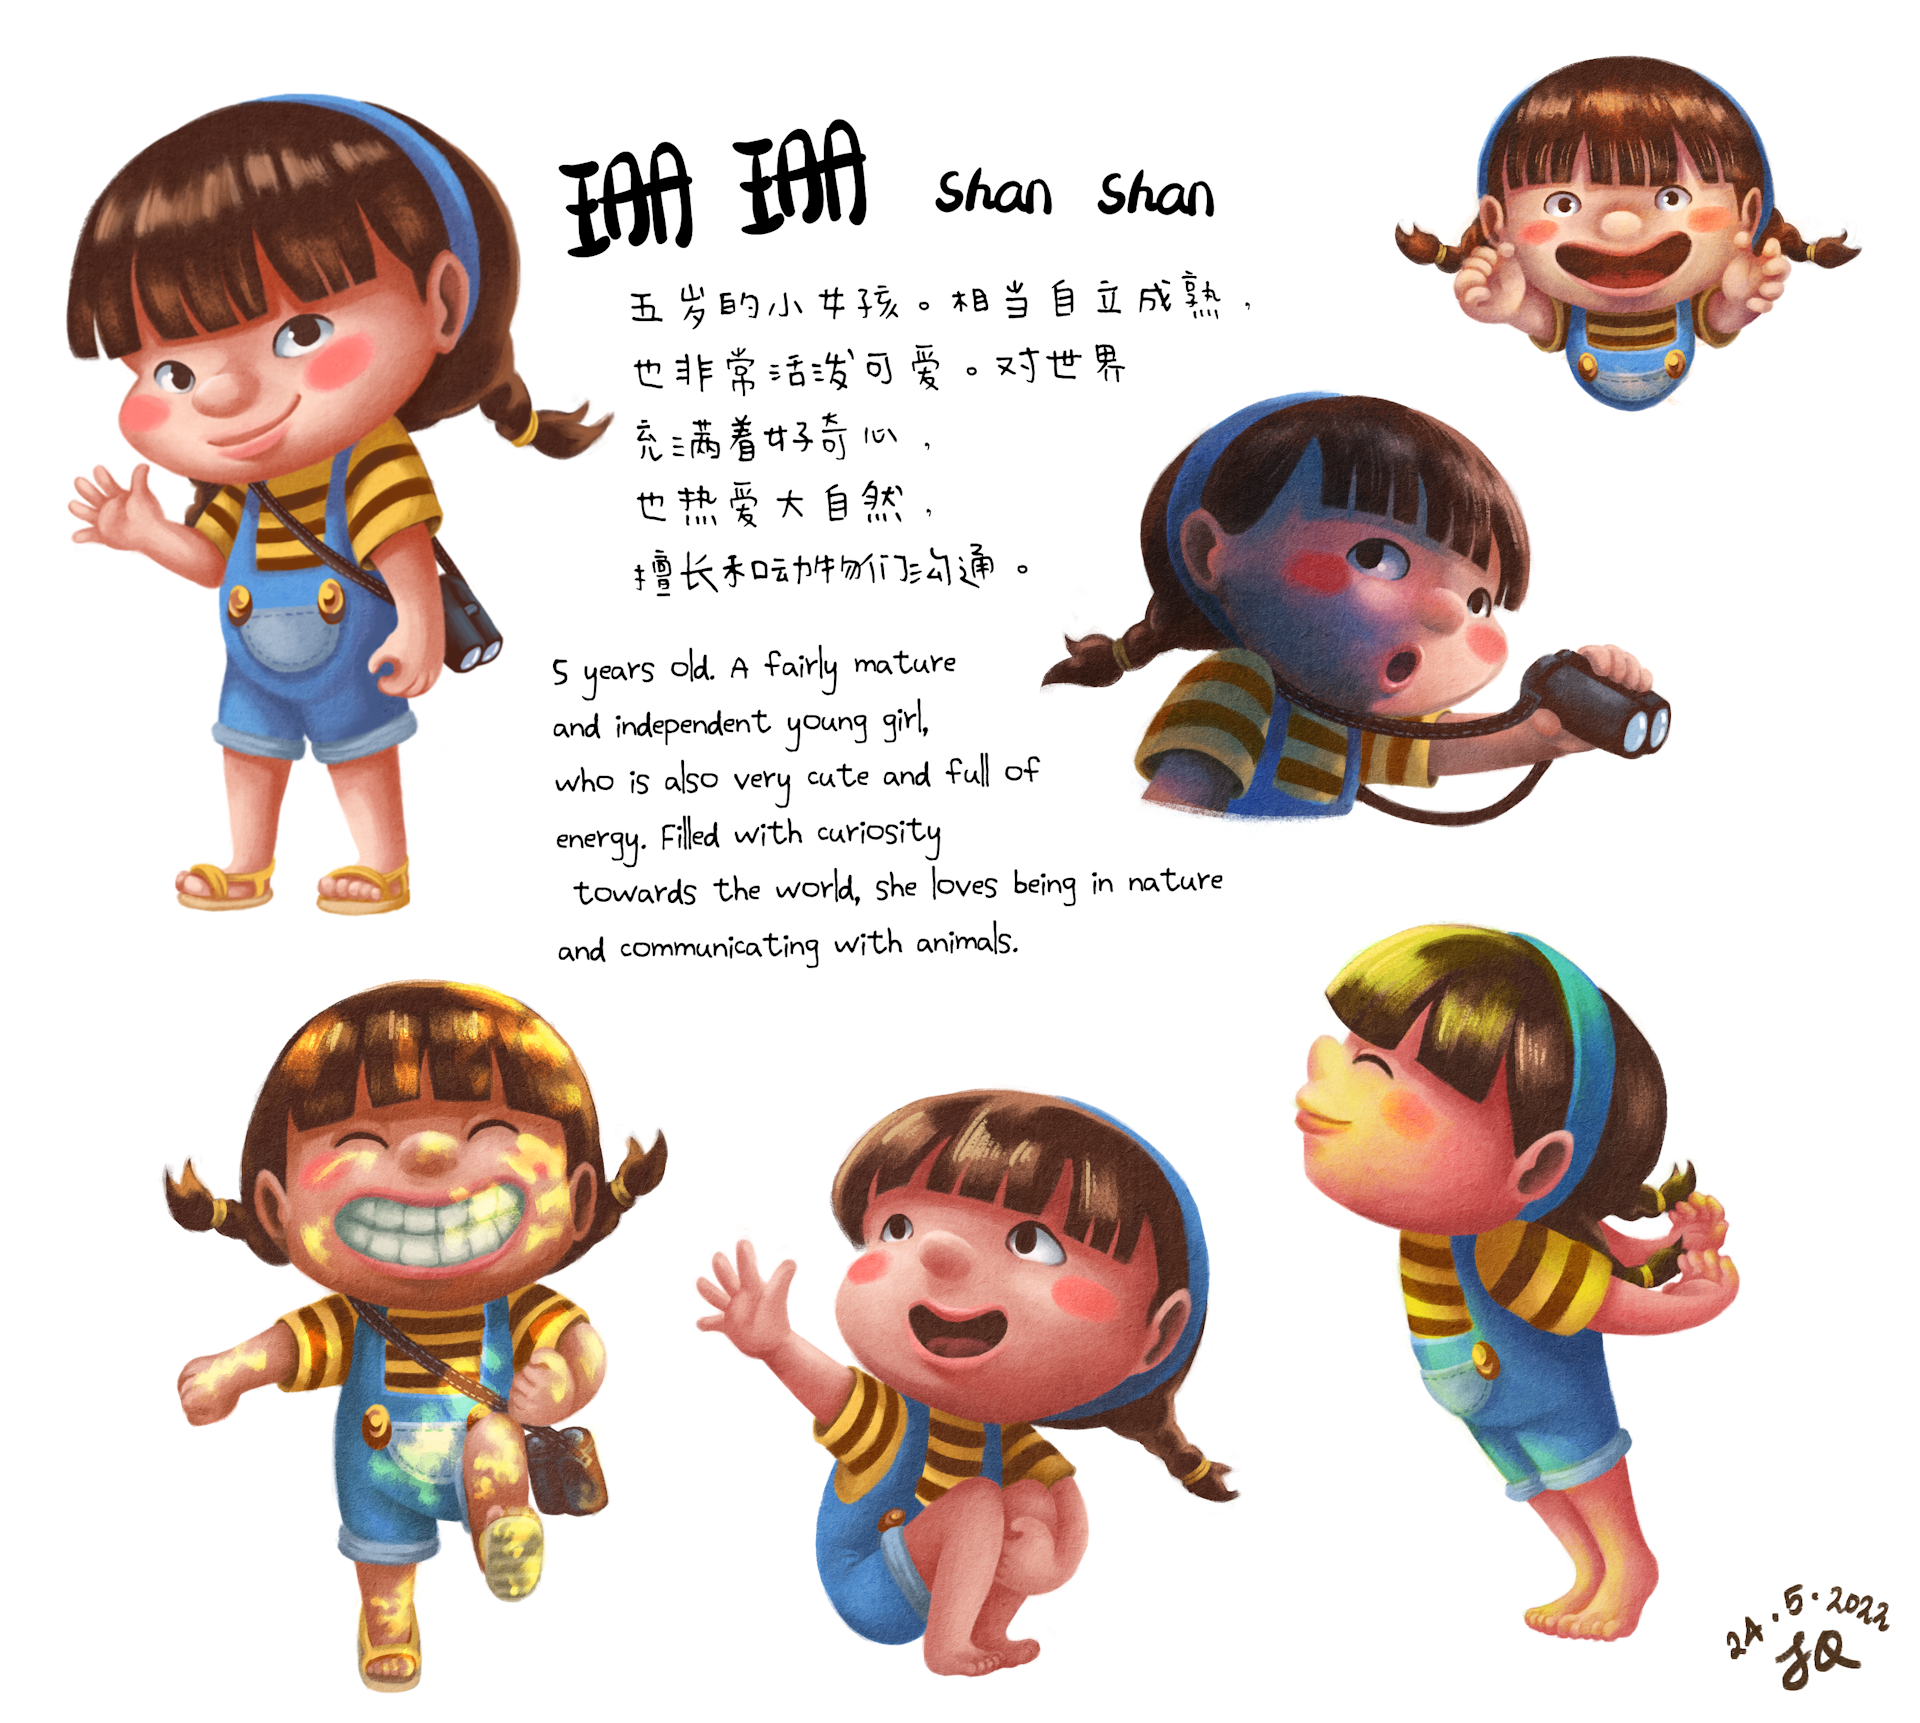 Character design model sheet of a young girl, with her in 6 different poses. She has two short pigtails with yellow hairbands, a blue headband, and wears a blue denim jumpsuit and brown-striped yellow shirt. She usually carries around a pair of binoculars which are slung over her shoulder.